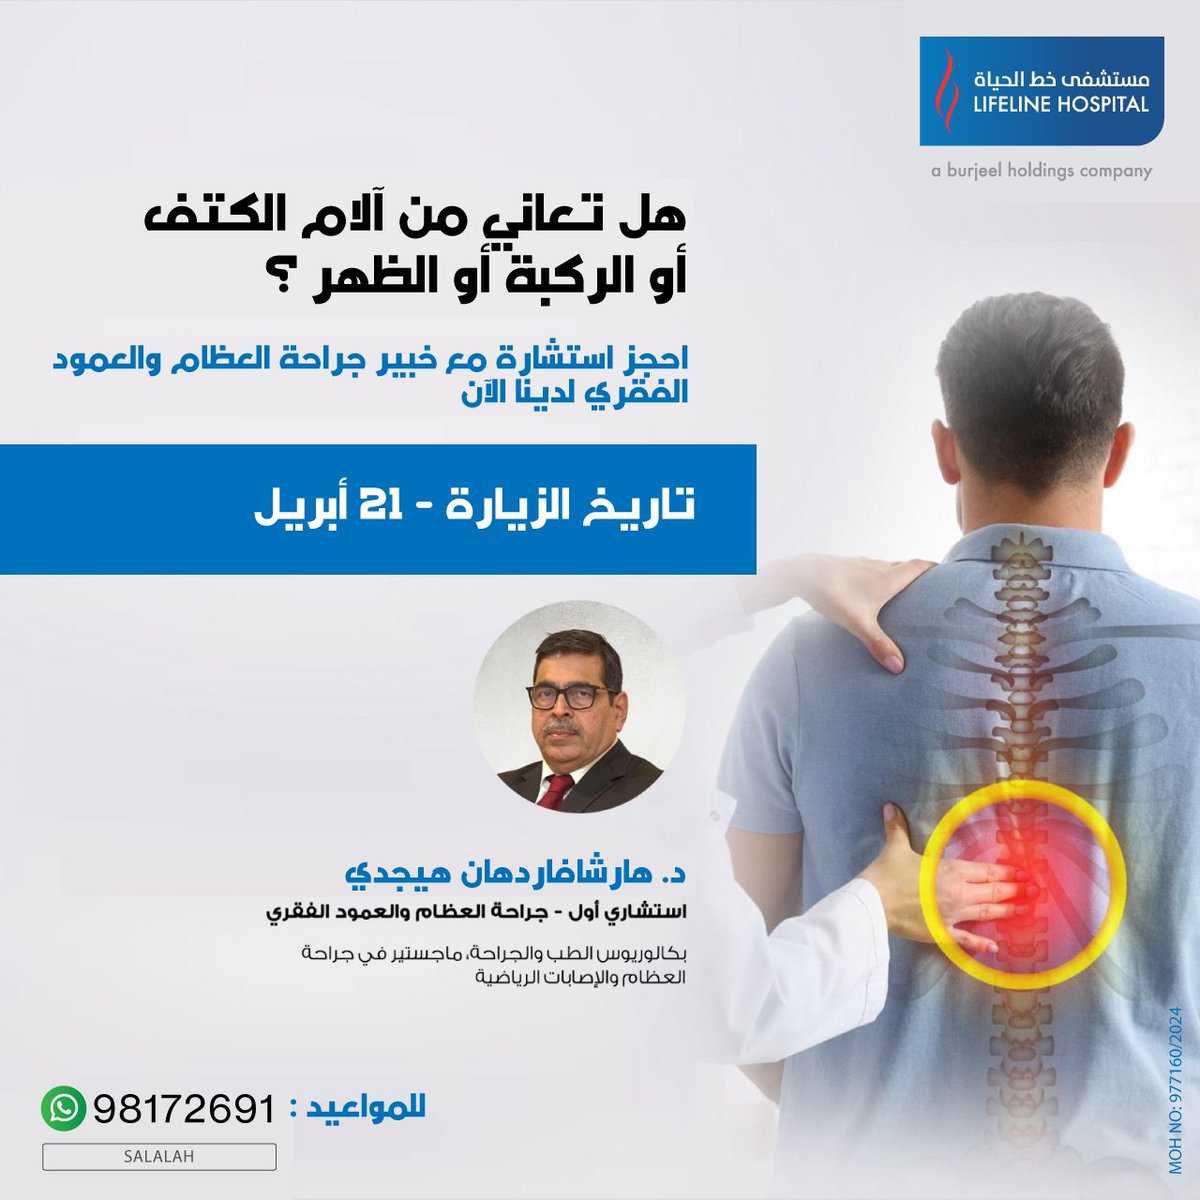 Avail Consultation from renowned Orthopedic & Spine Surgery expert from India, Dr. Harshavardhan Hegde at @lifelinehospital_salalah on 21st April,5pm-8pm. Prior booking required. For booking call 23212340 or send a WhatsApp message to 98172691. #orthopedicsurgery #orthopedics